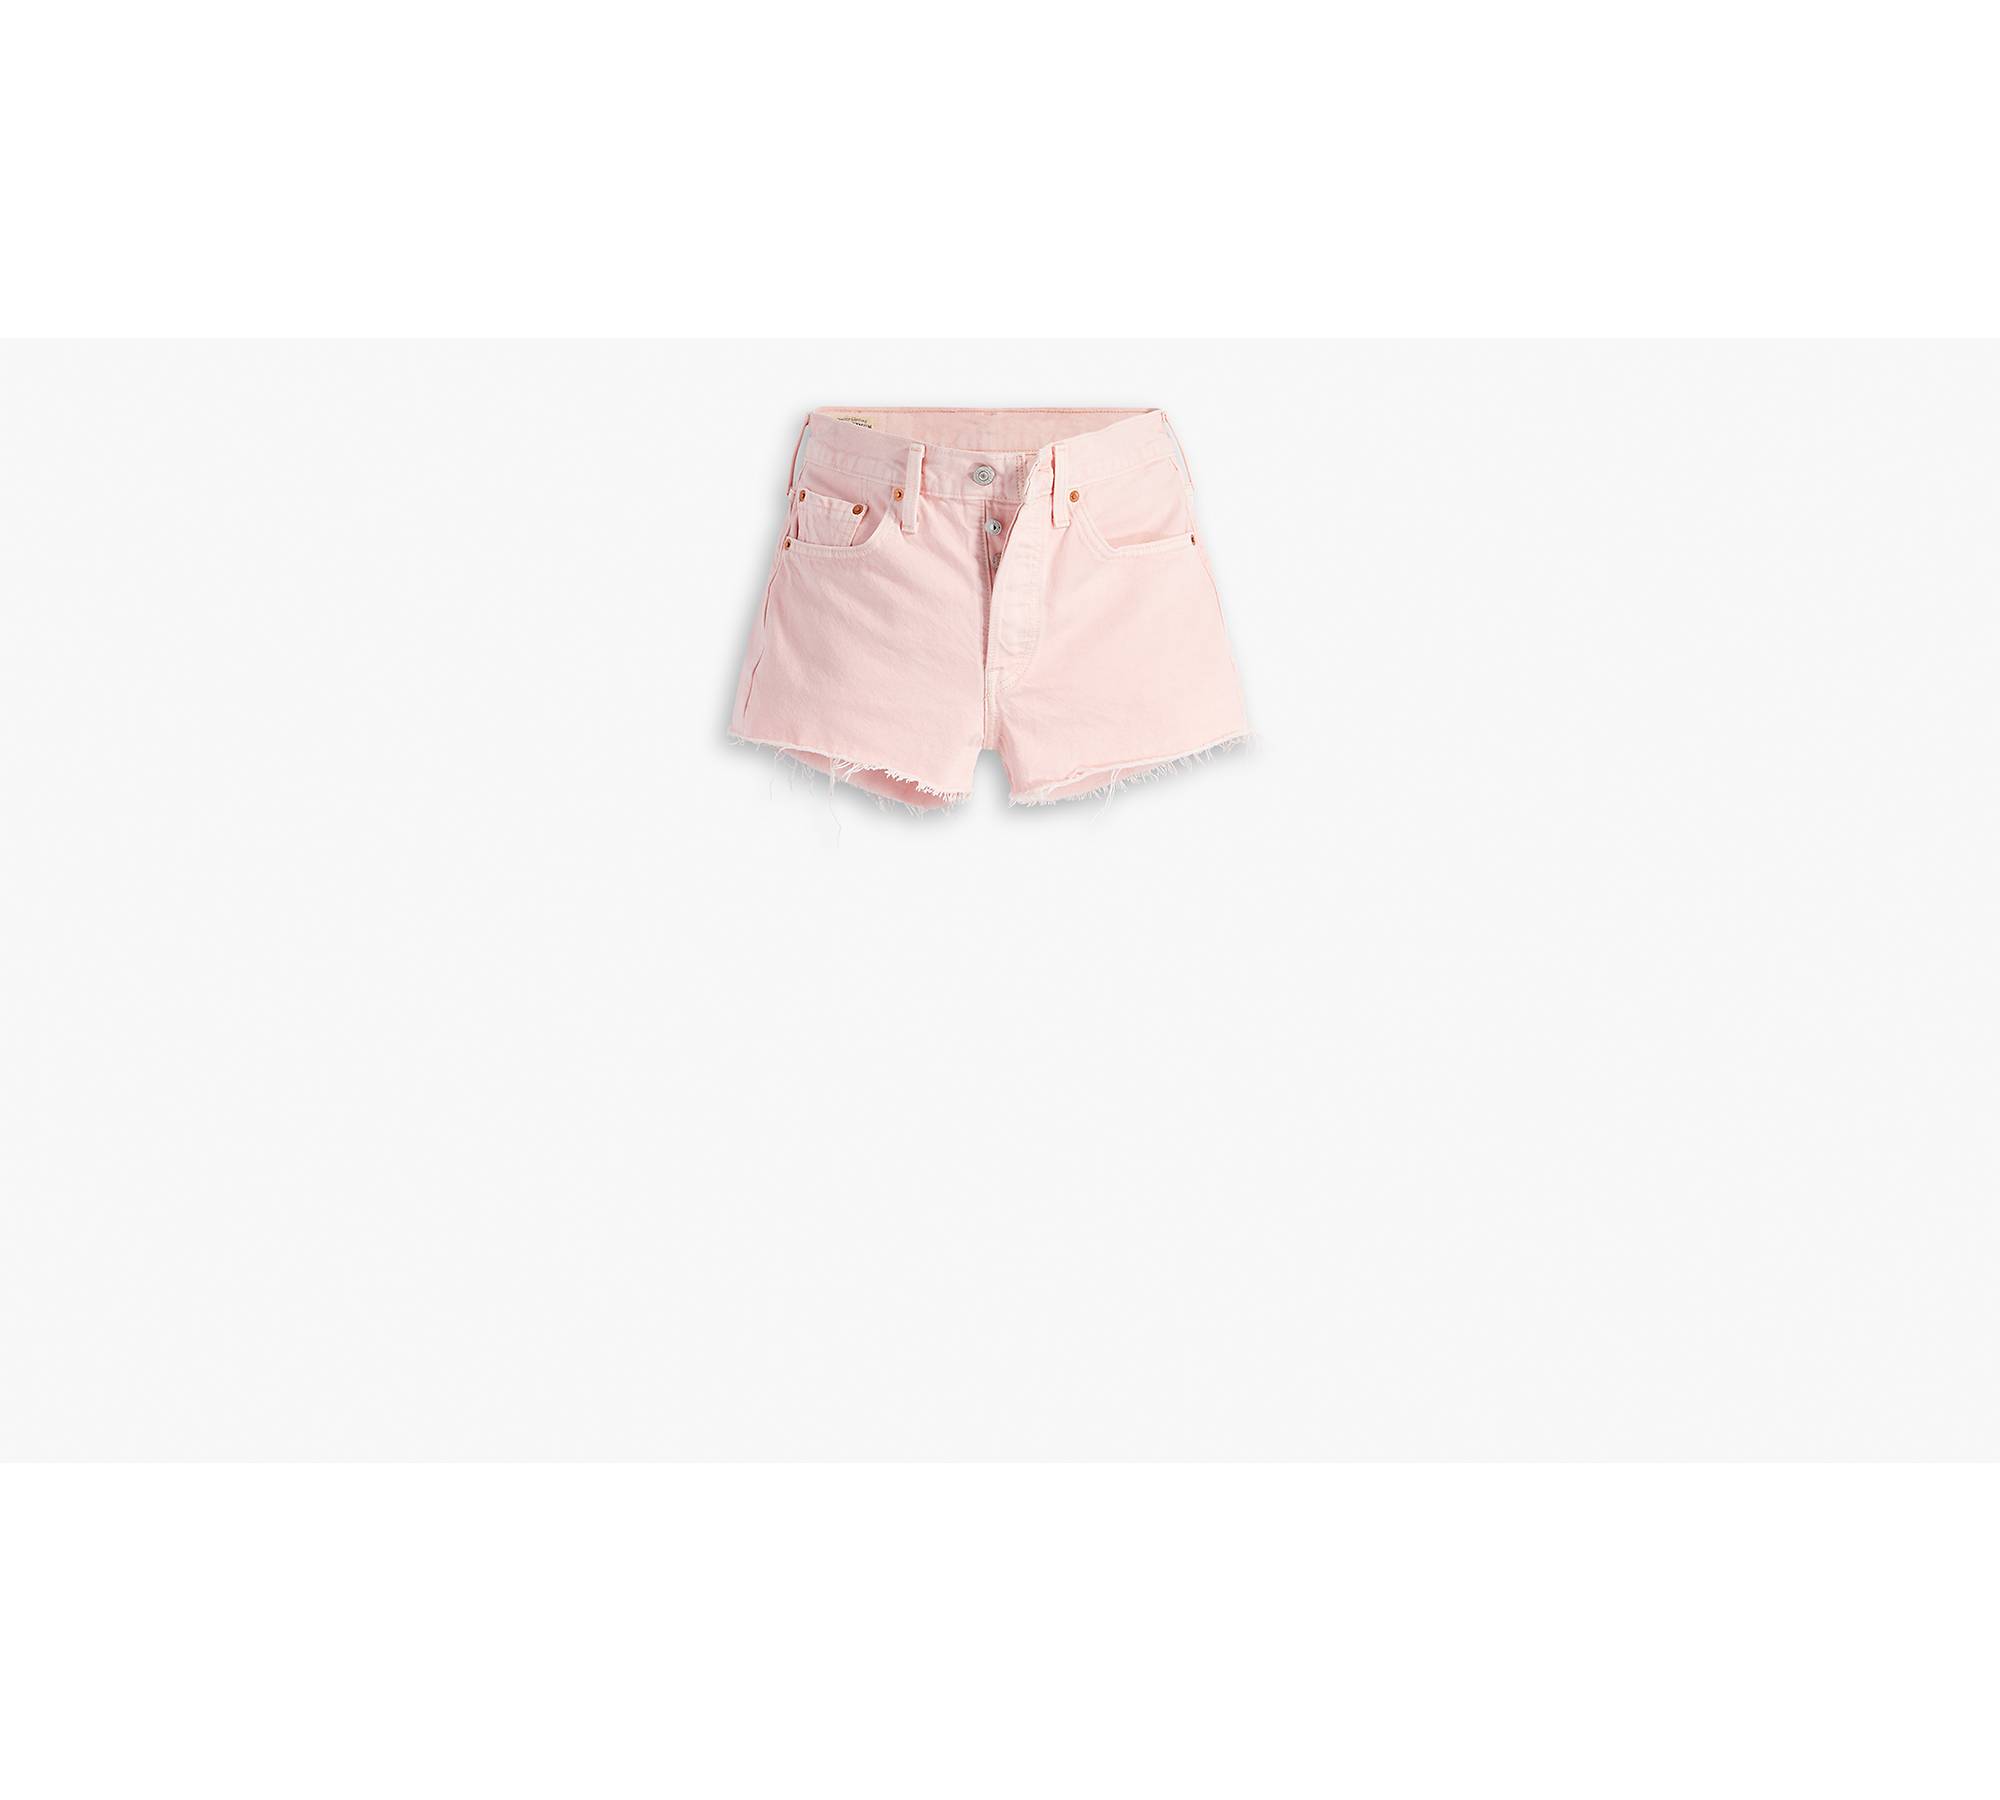 Do+Be Fit and Flare Shorts - Hot Pink Small